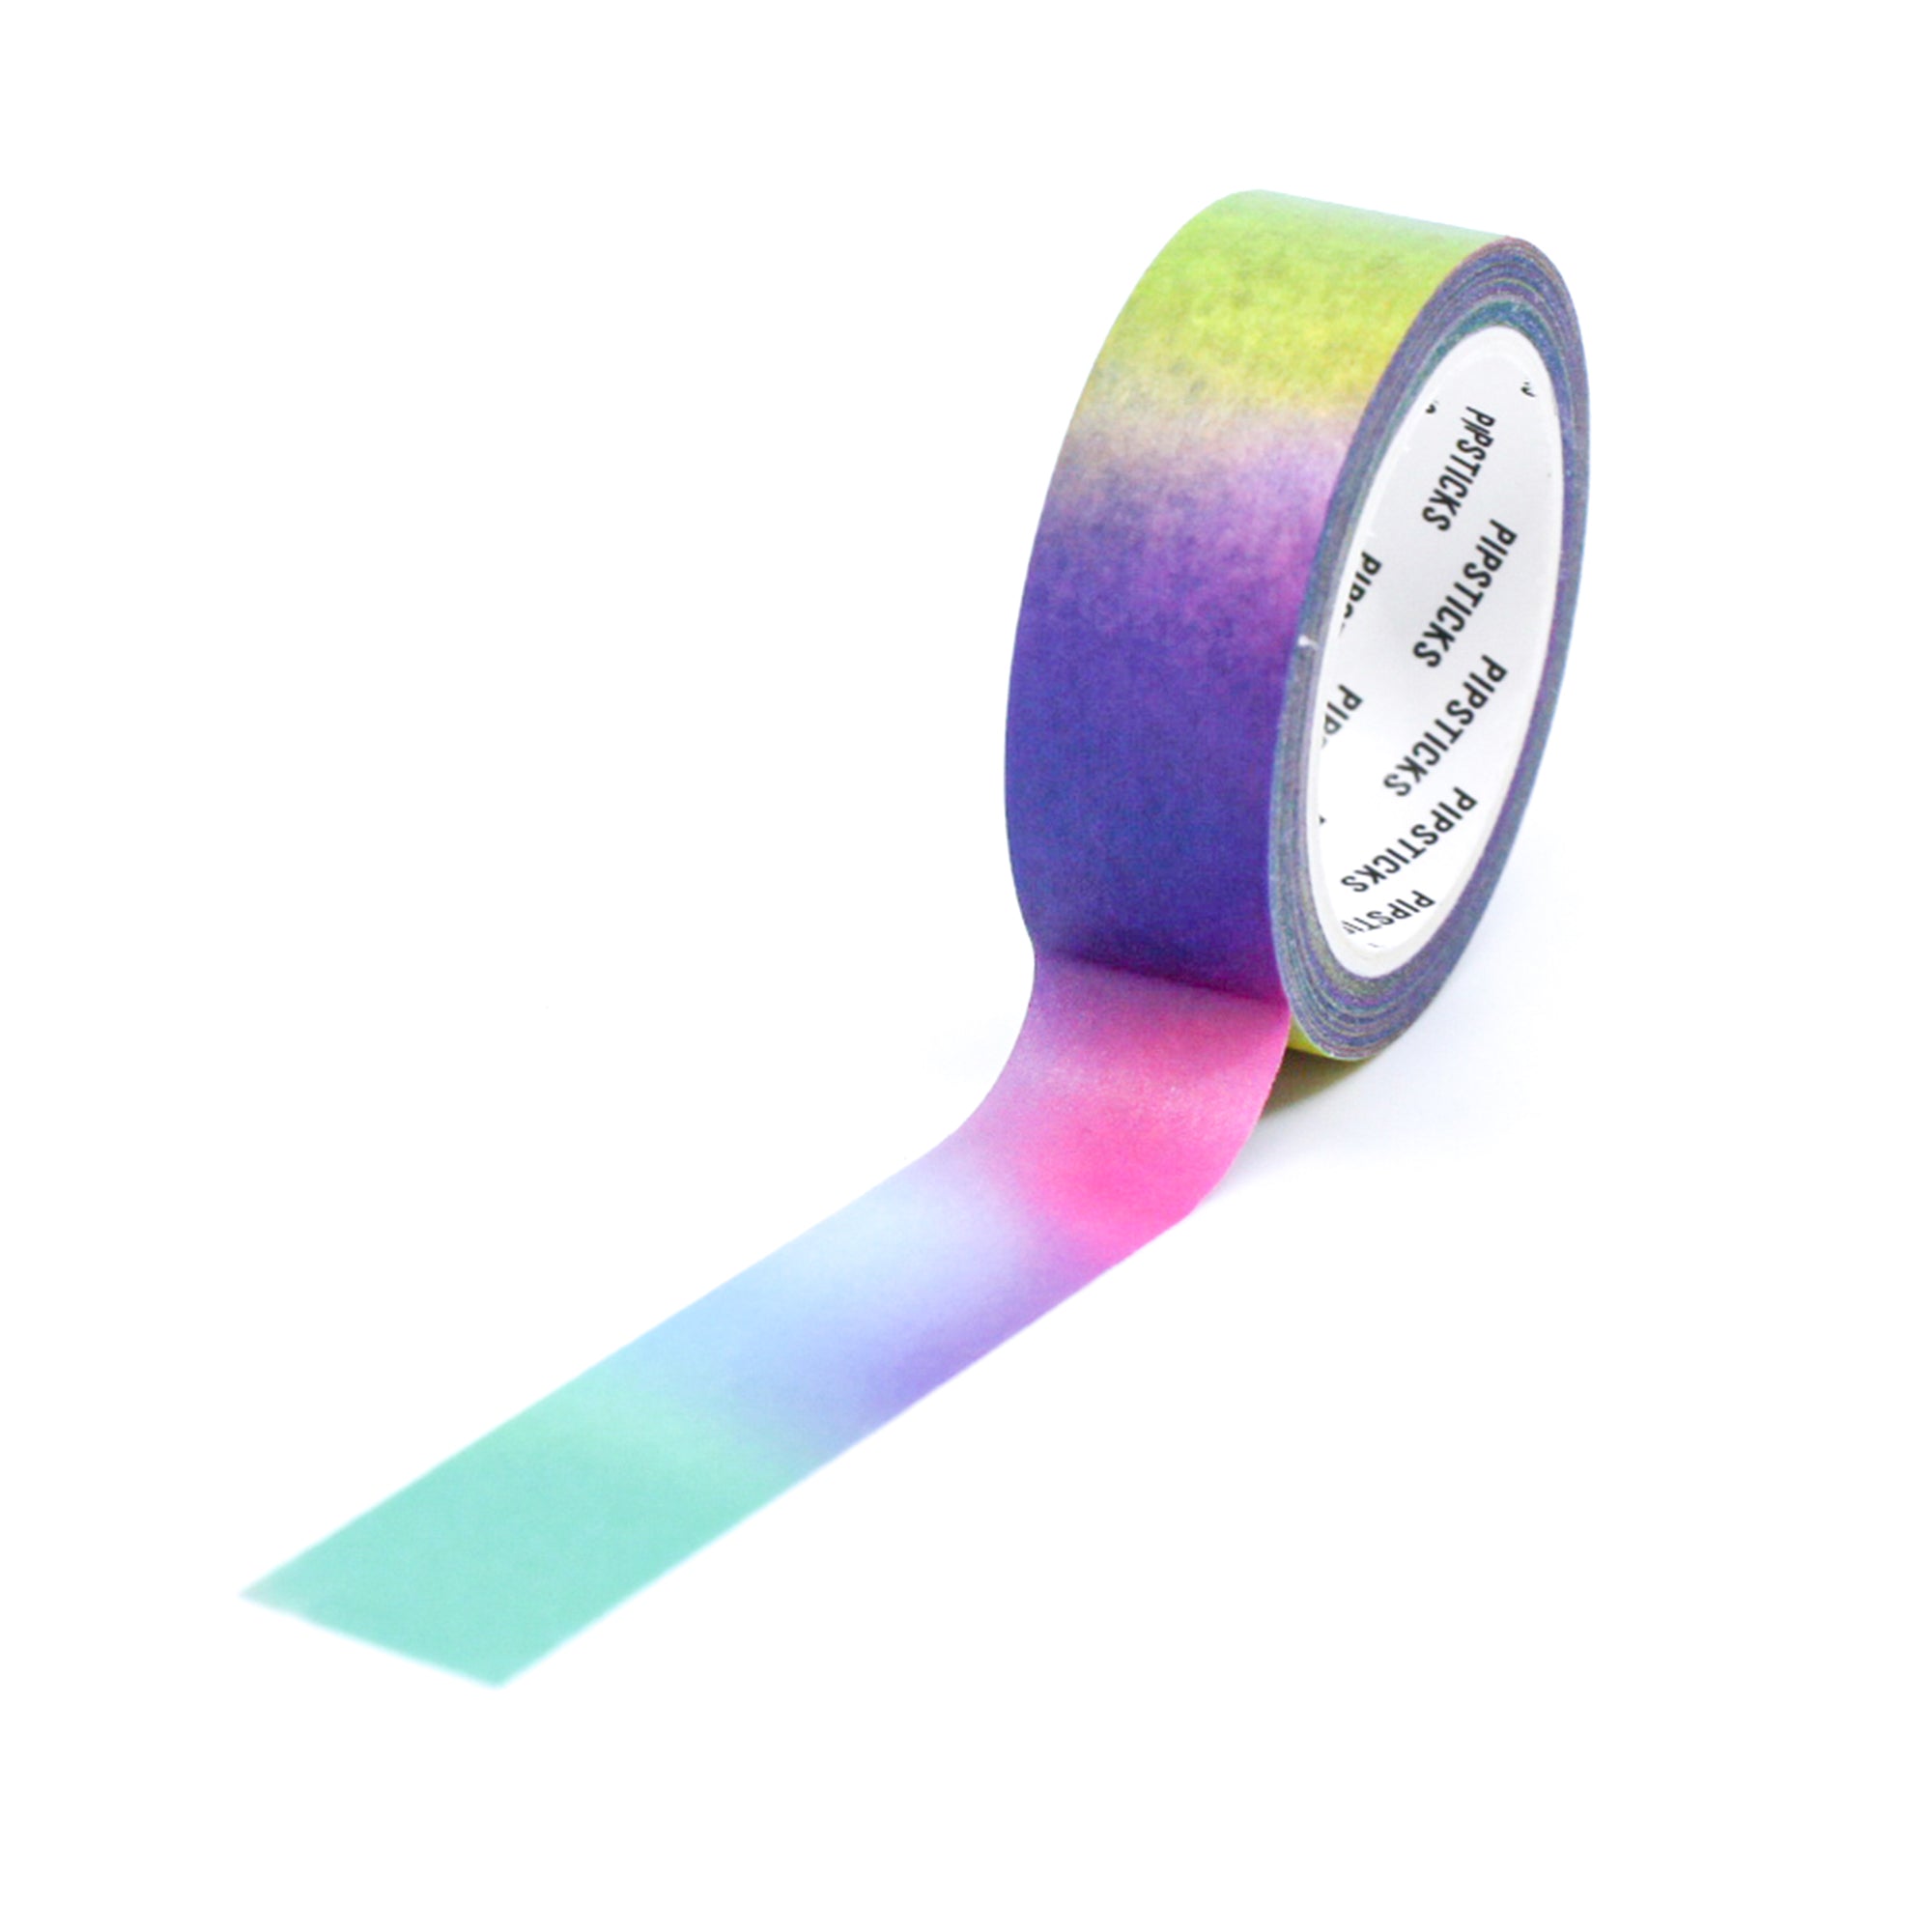 Brighten up your projects with our Ombre Rainbow Watercolor Washi Tape, featuring a vibrant and smoothly blended ombre rainbow design. Ideal for adding a splash of color and creativity to your crafts. This tape is from pipsticks and sold at BBB Supplies Craft Shop.